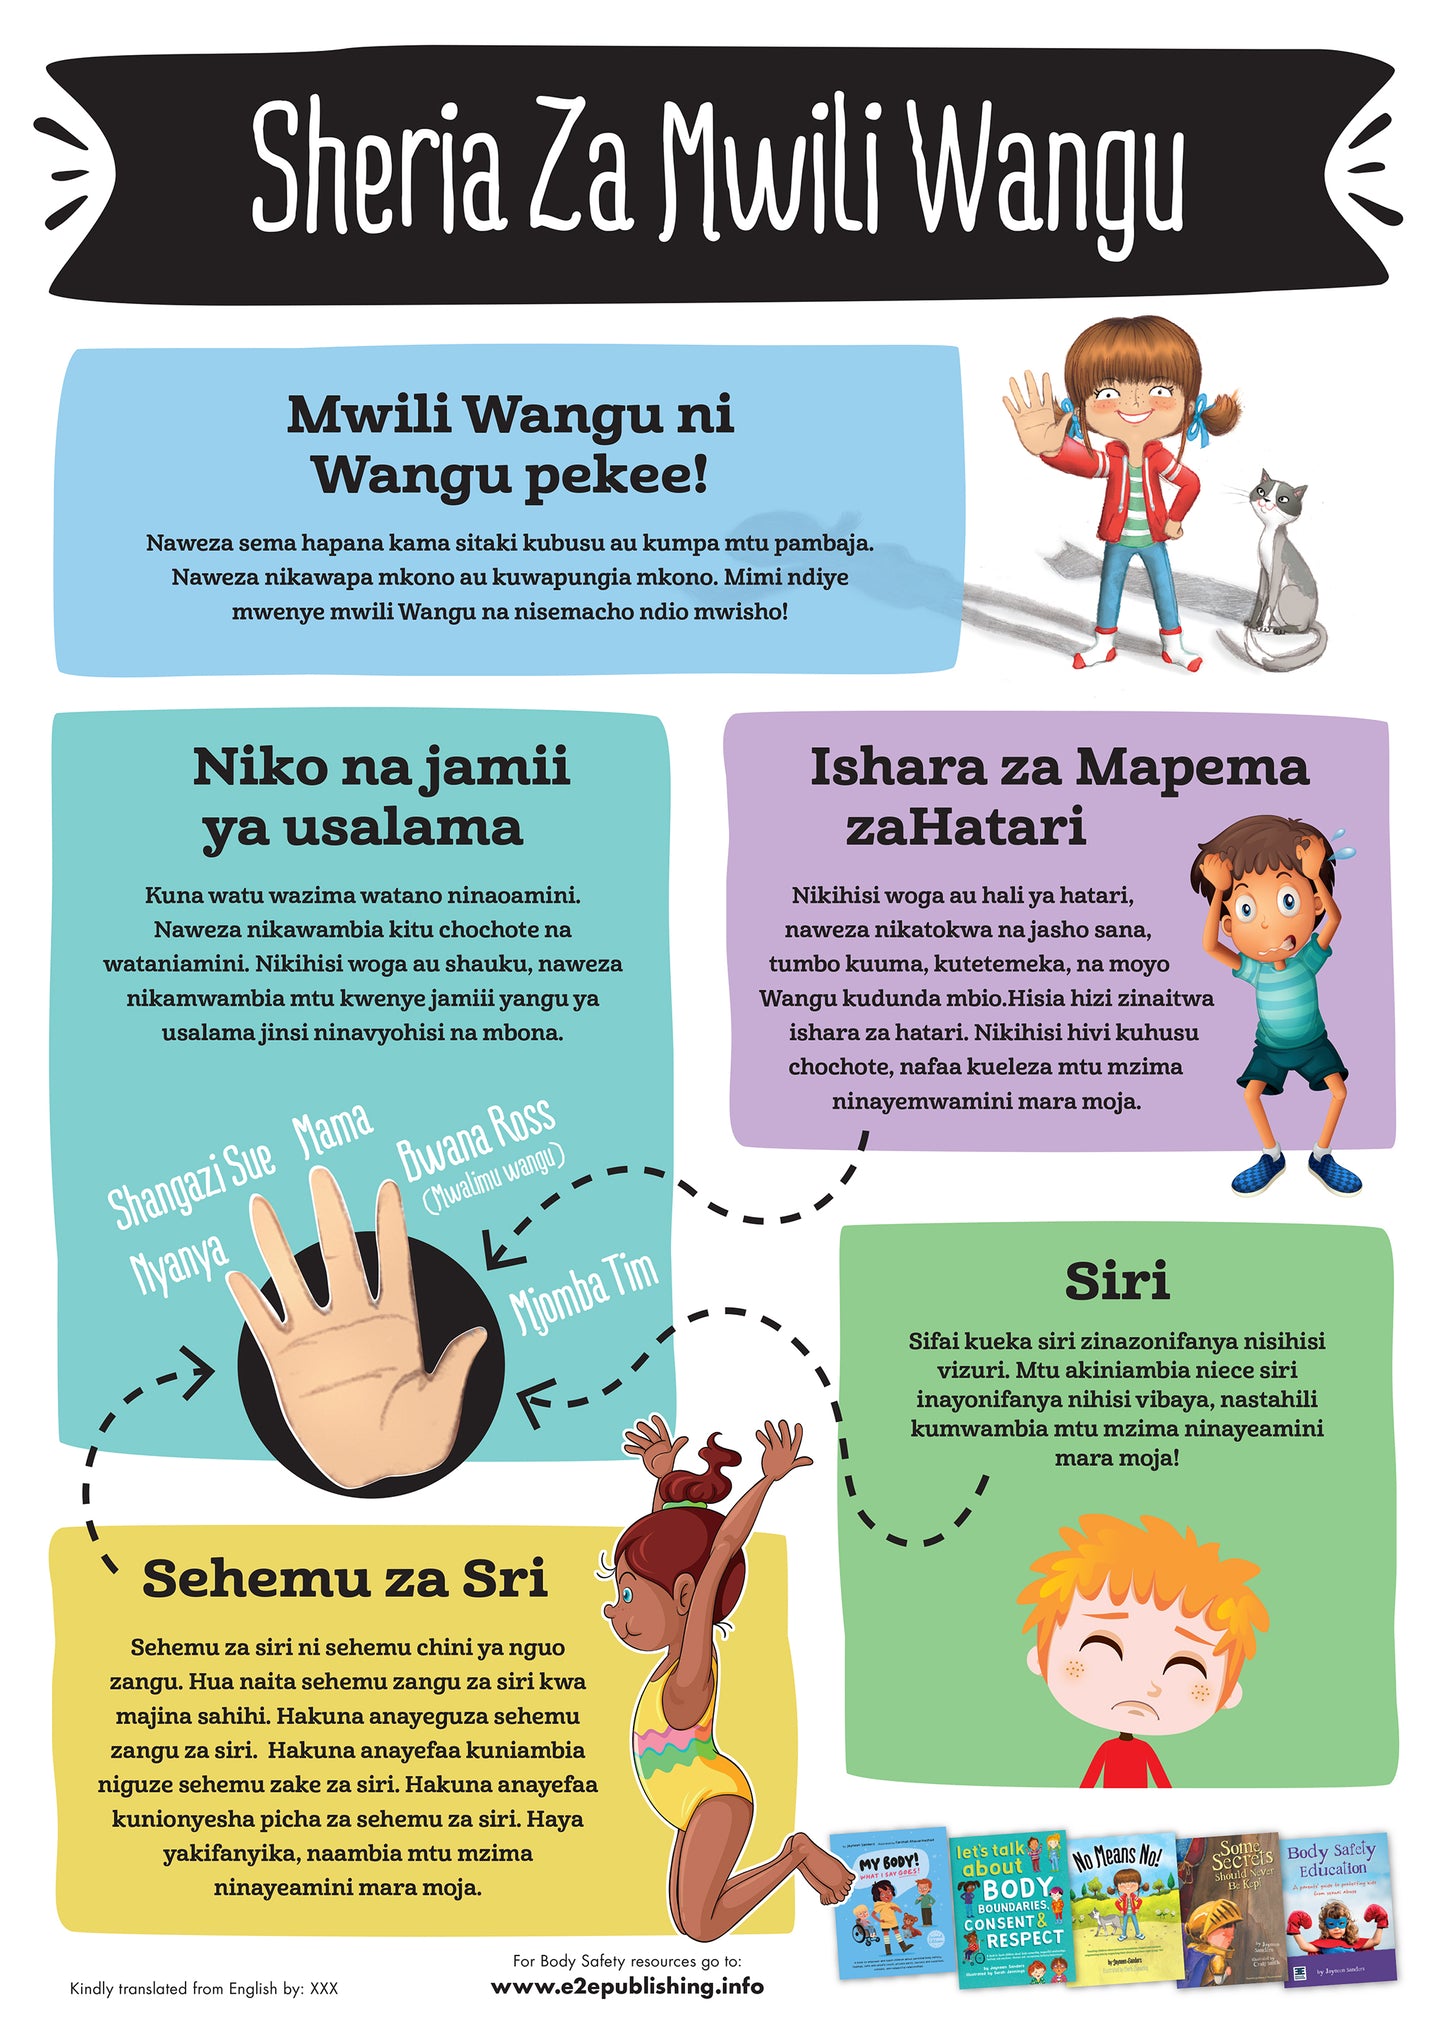 Body Safety Rules poster for children, written in Swahili